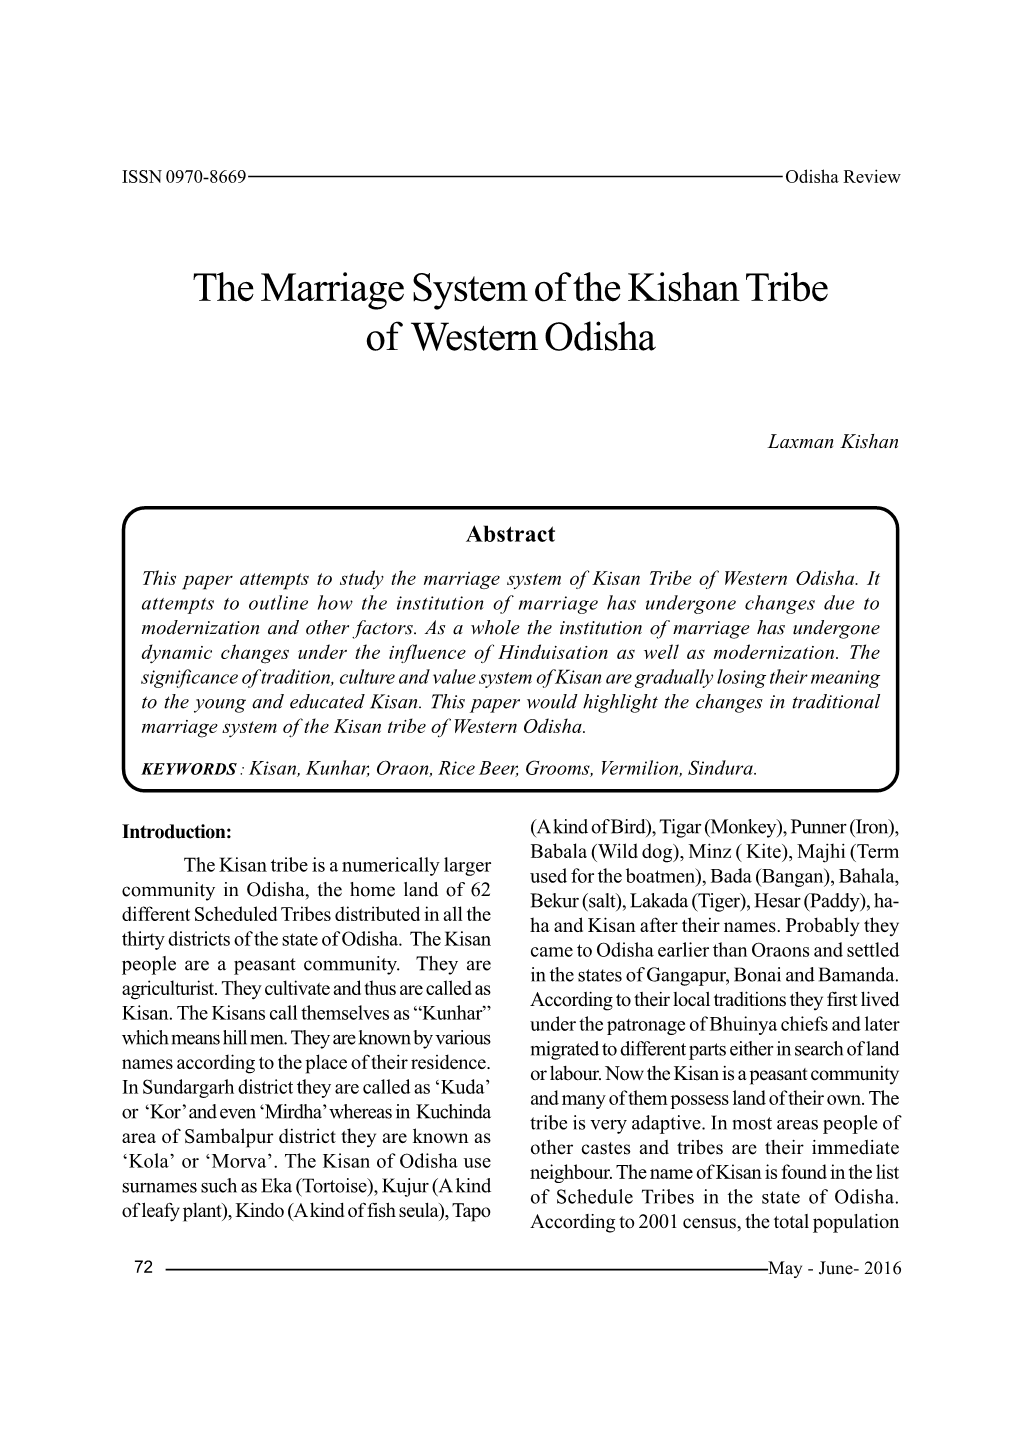 The Marriage System of the Kishan Tribe of Western Odisha